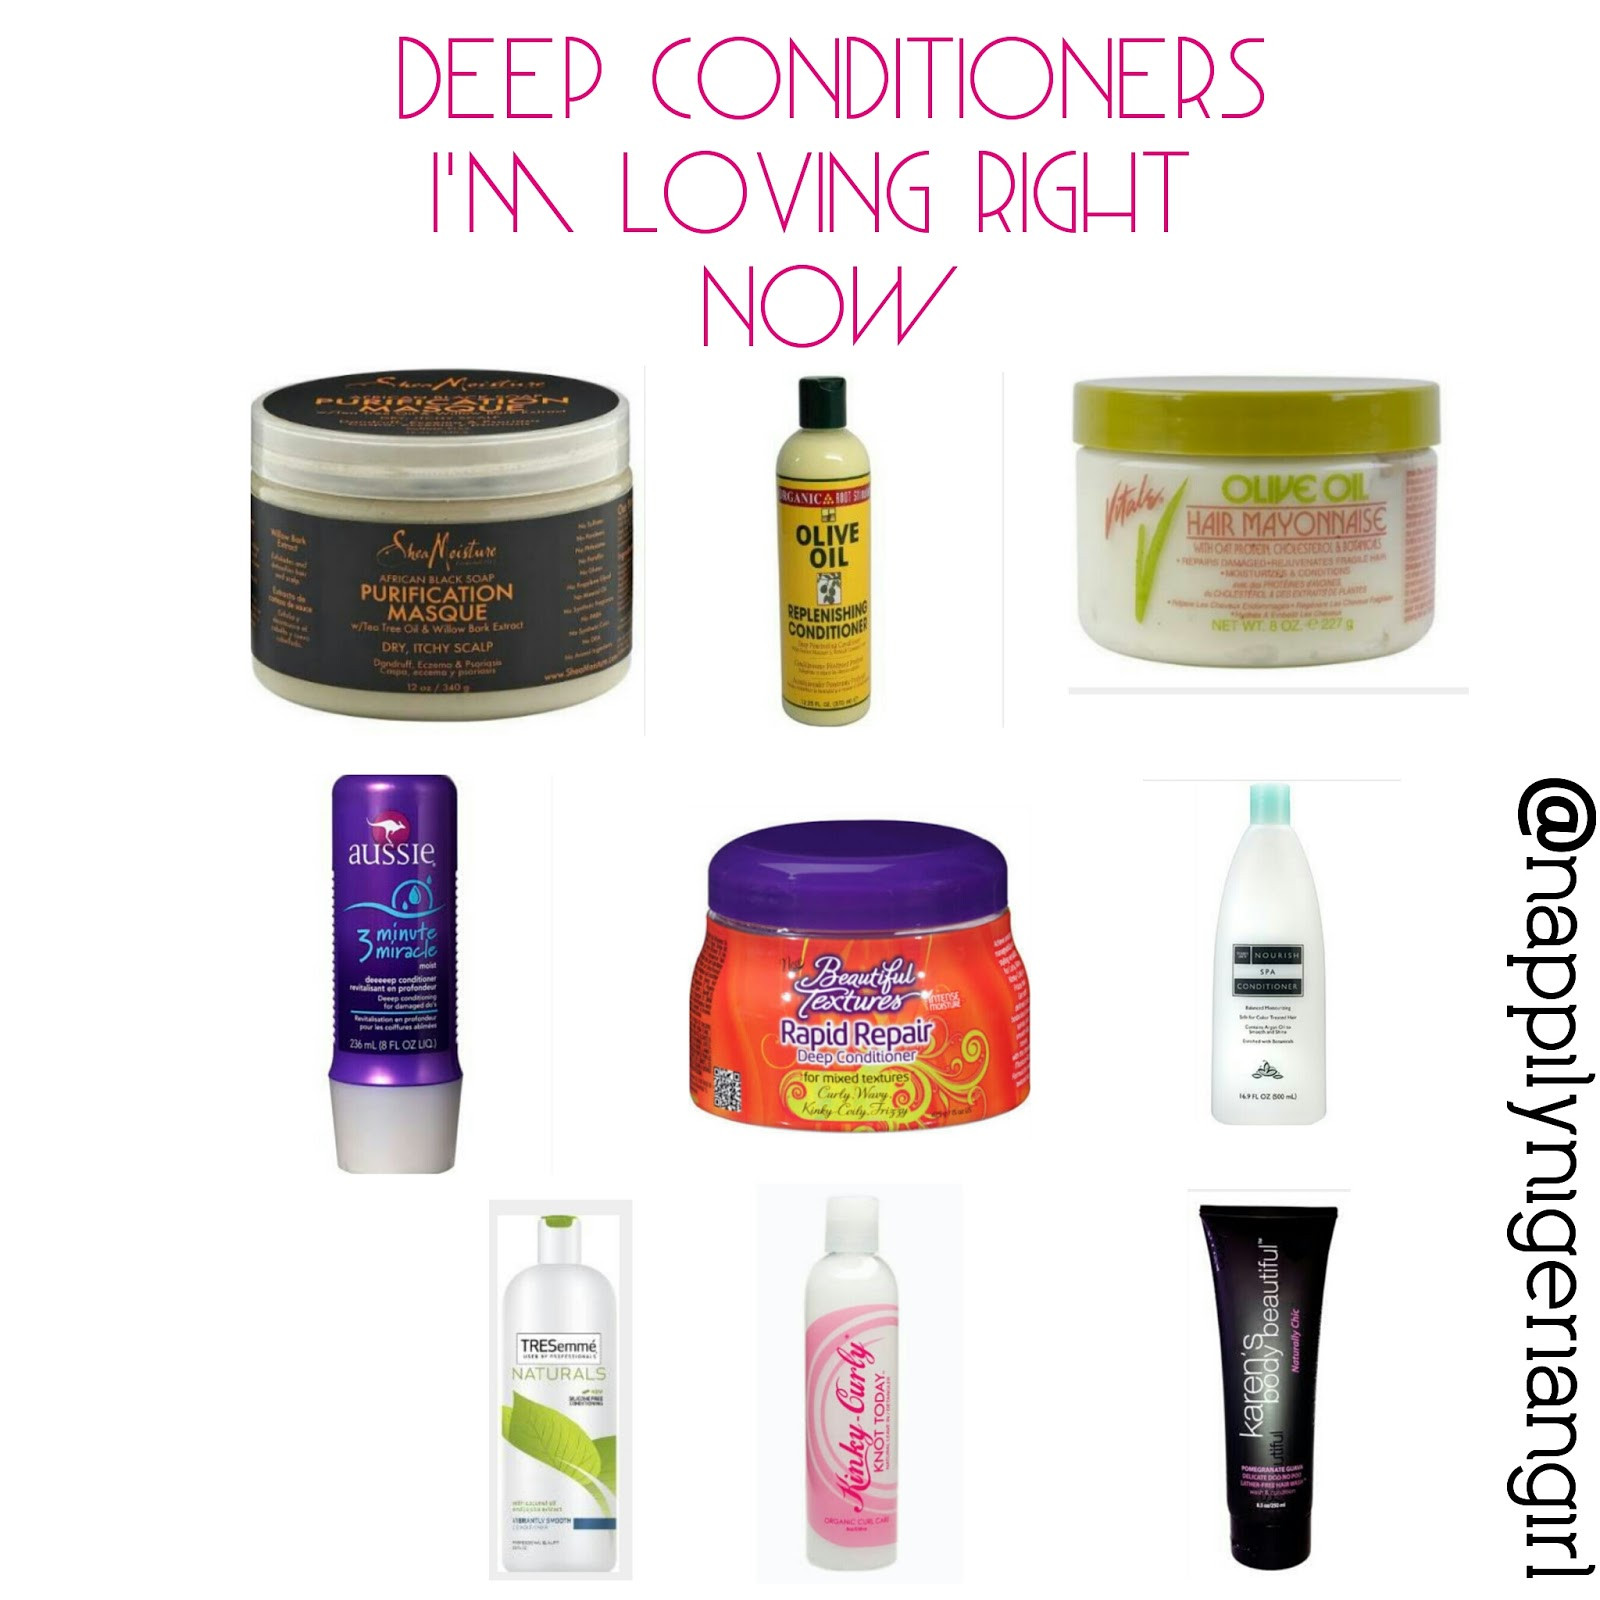 DIY Leave In Conditioner For Low Porosity Hair
 TOP DEEP CONDITIONERS FOR NATURAL HAIR nappilynigeriangirl